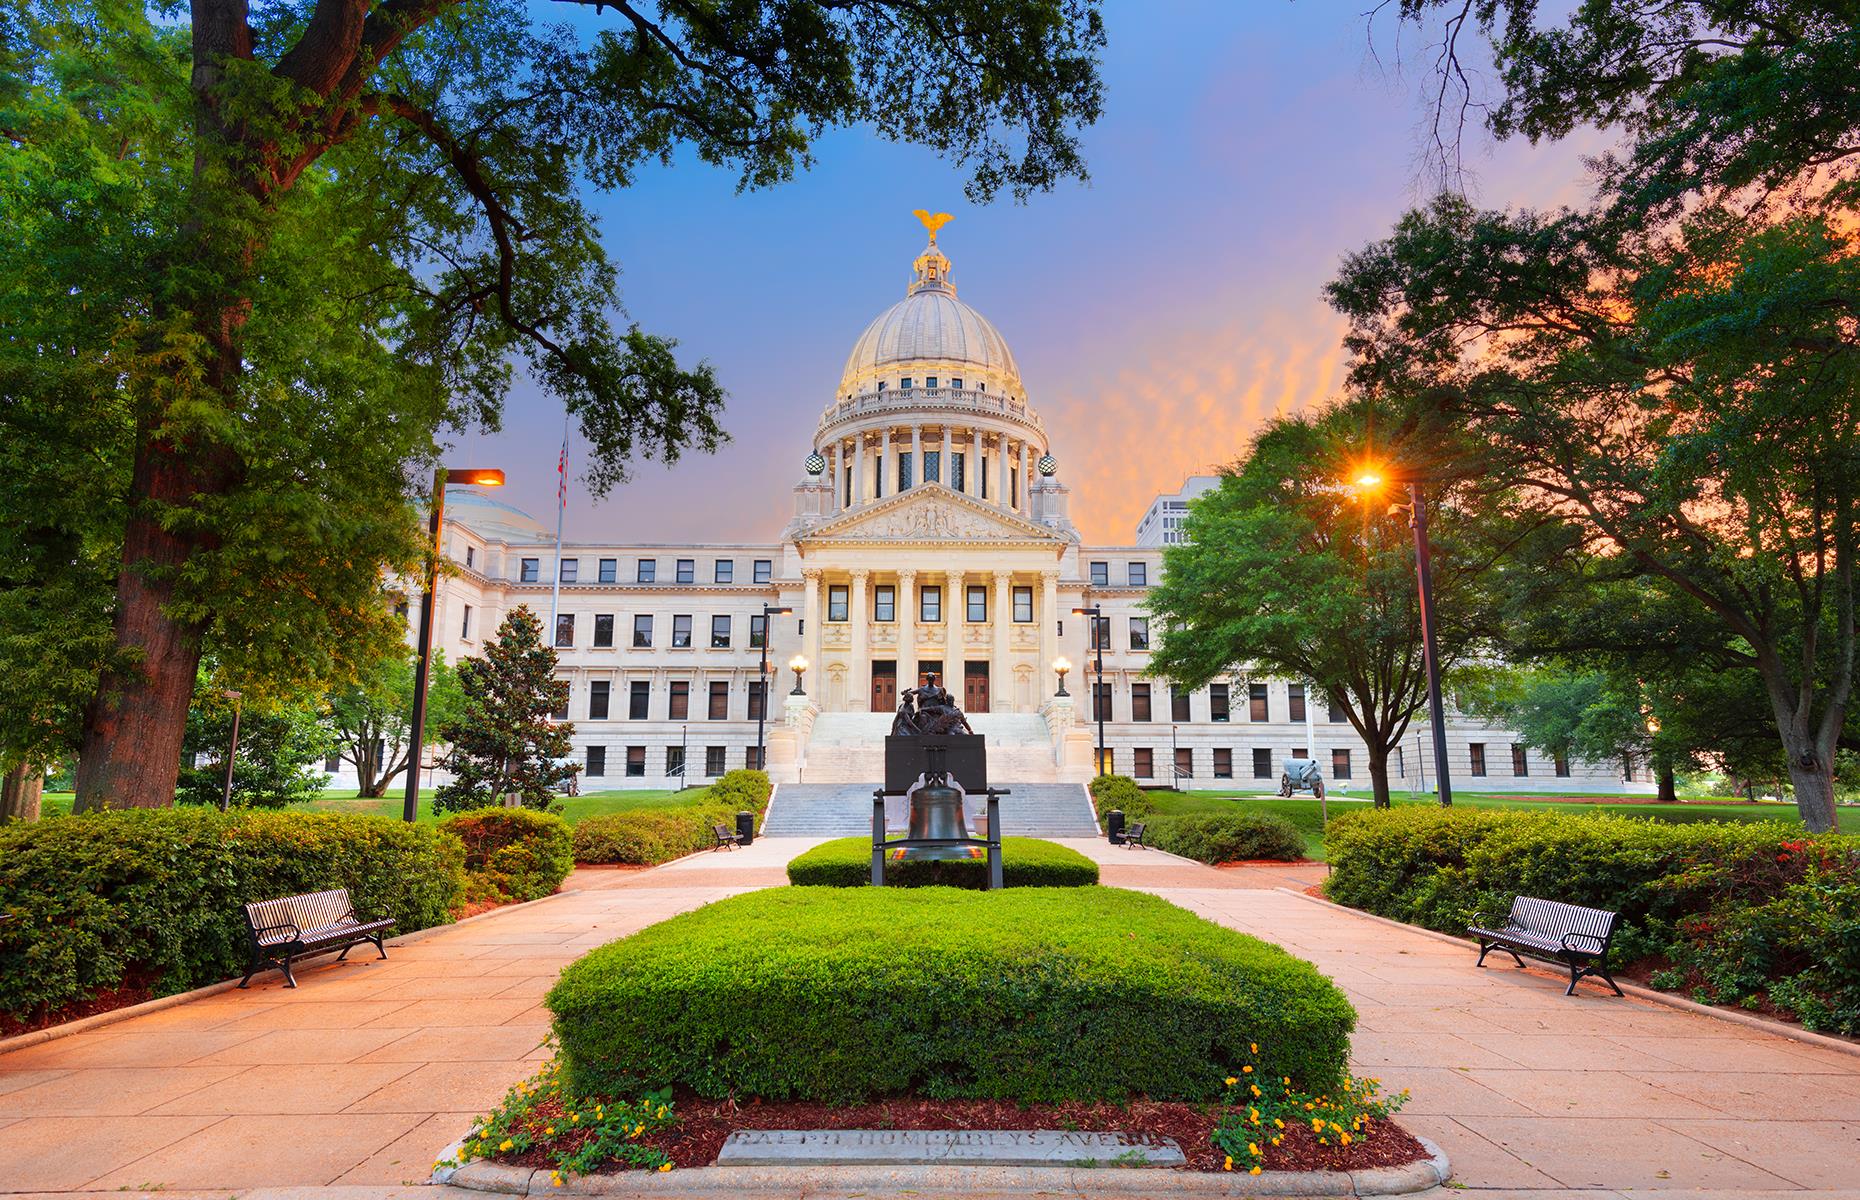 <p>The seat of the state government since 1903, the Mississippi State Capitol is also a National Historic Landmark. An architectural marvel in itself, it's also key to the history of the state and of the city. <a href="https://www.legislature.ms.gov/about-the-capitol/tour-information/">Free guided tours</a> are available at certain times Monday through Friday so visitors can take in one of the replicas of the Liberty Bell, 10 types of marble used throughout the building and the ornate Rotunda.</p>